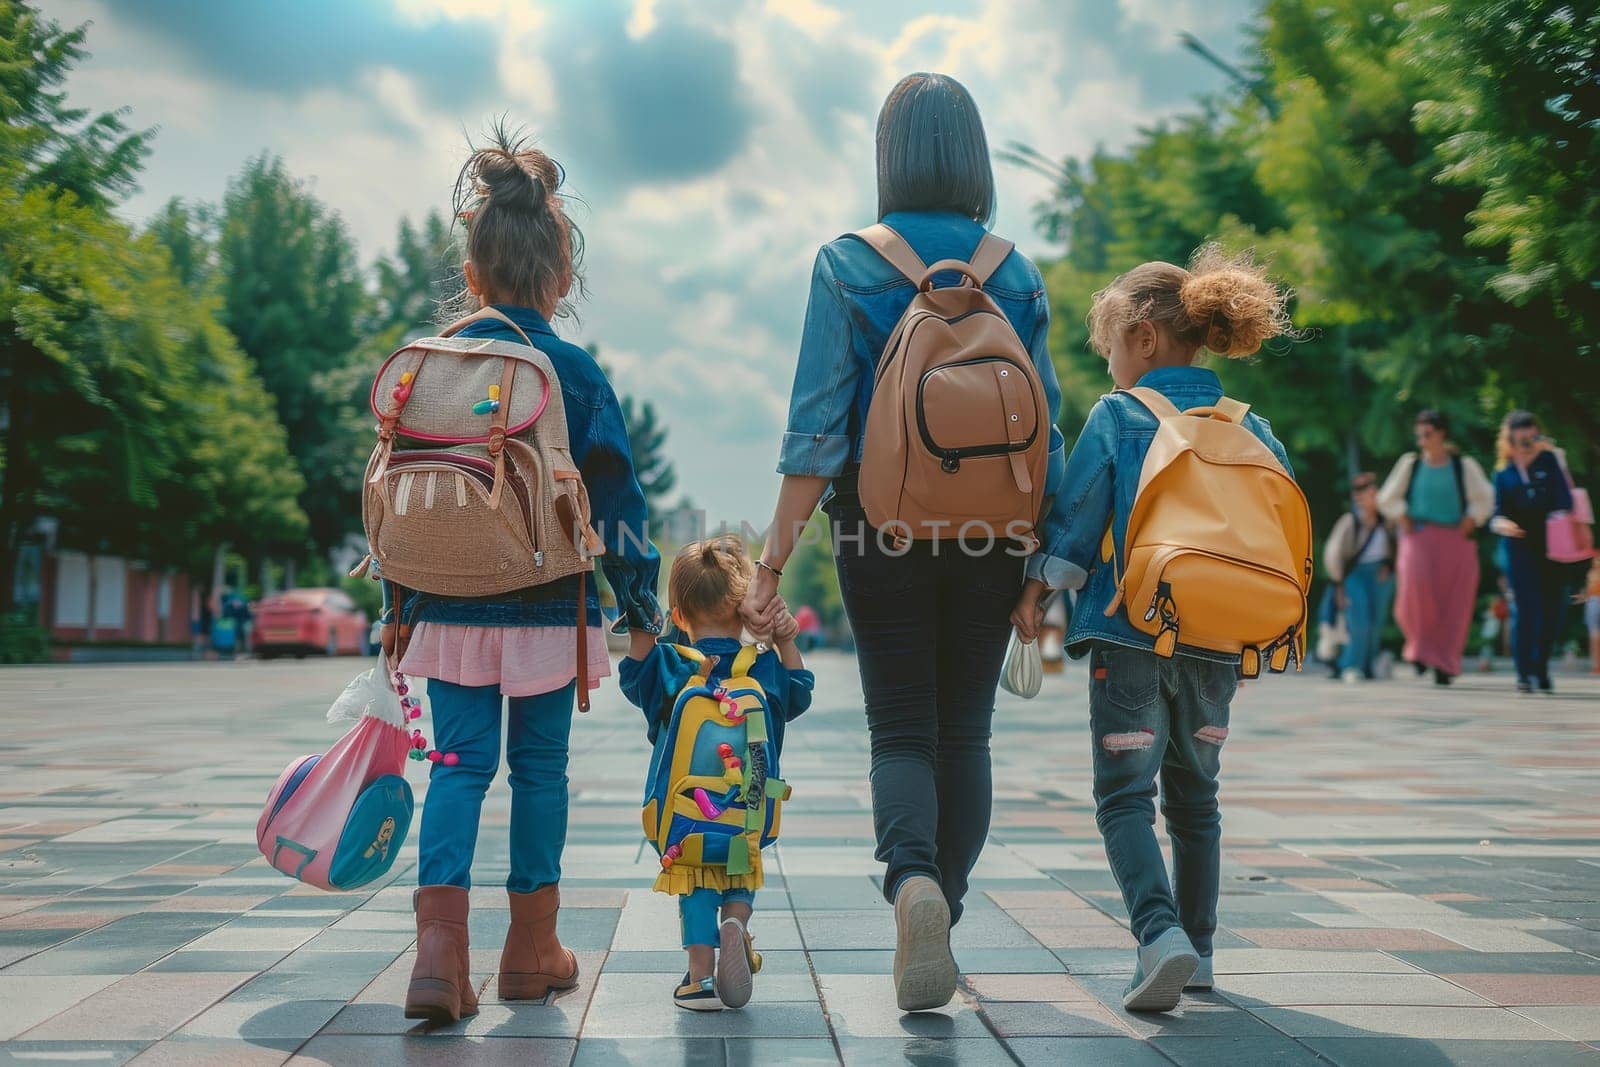 A group of four people, including a woman and three children, are walking down a street with backpacks